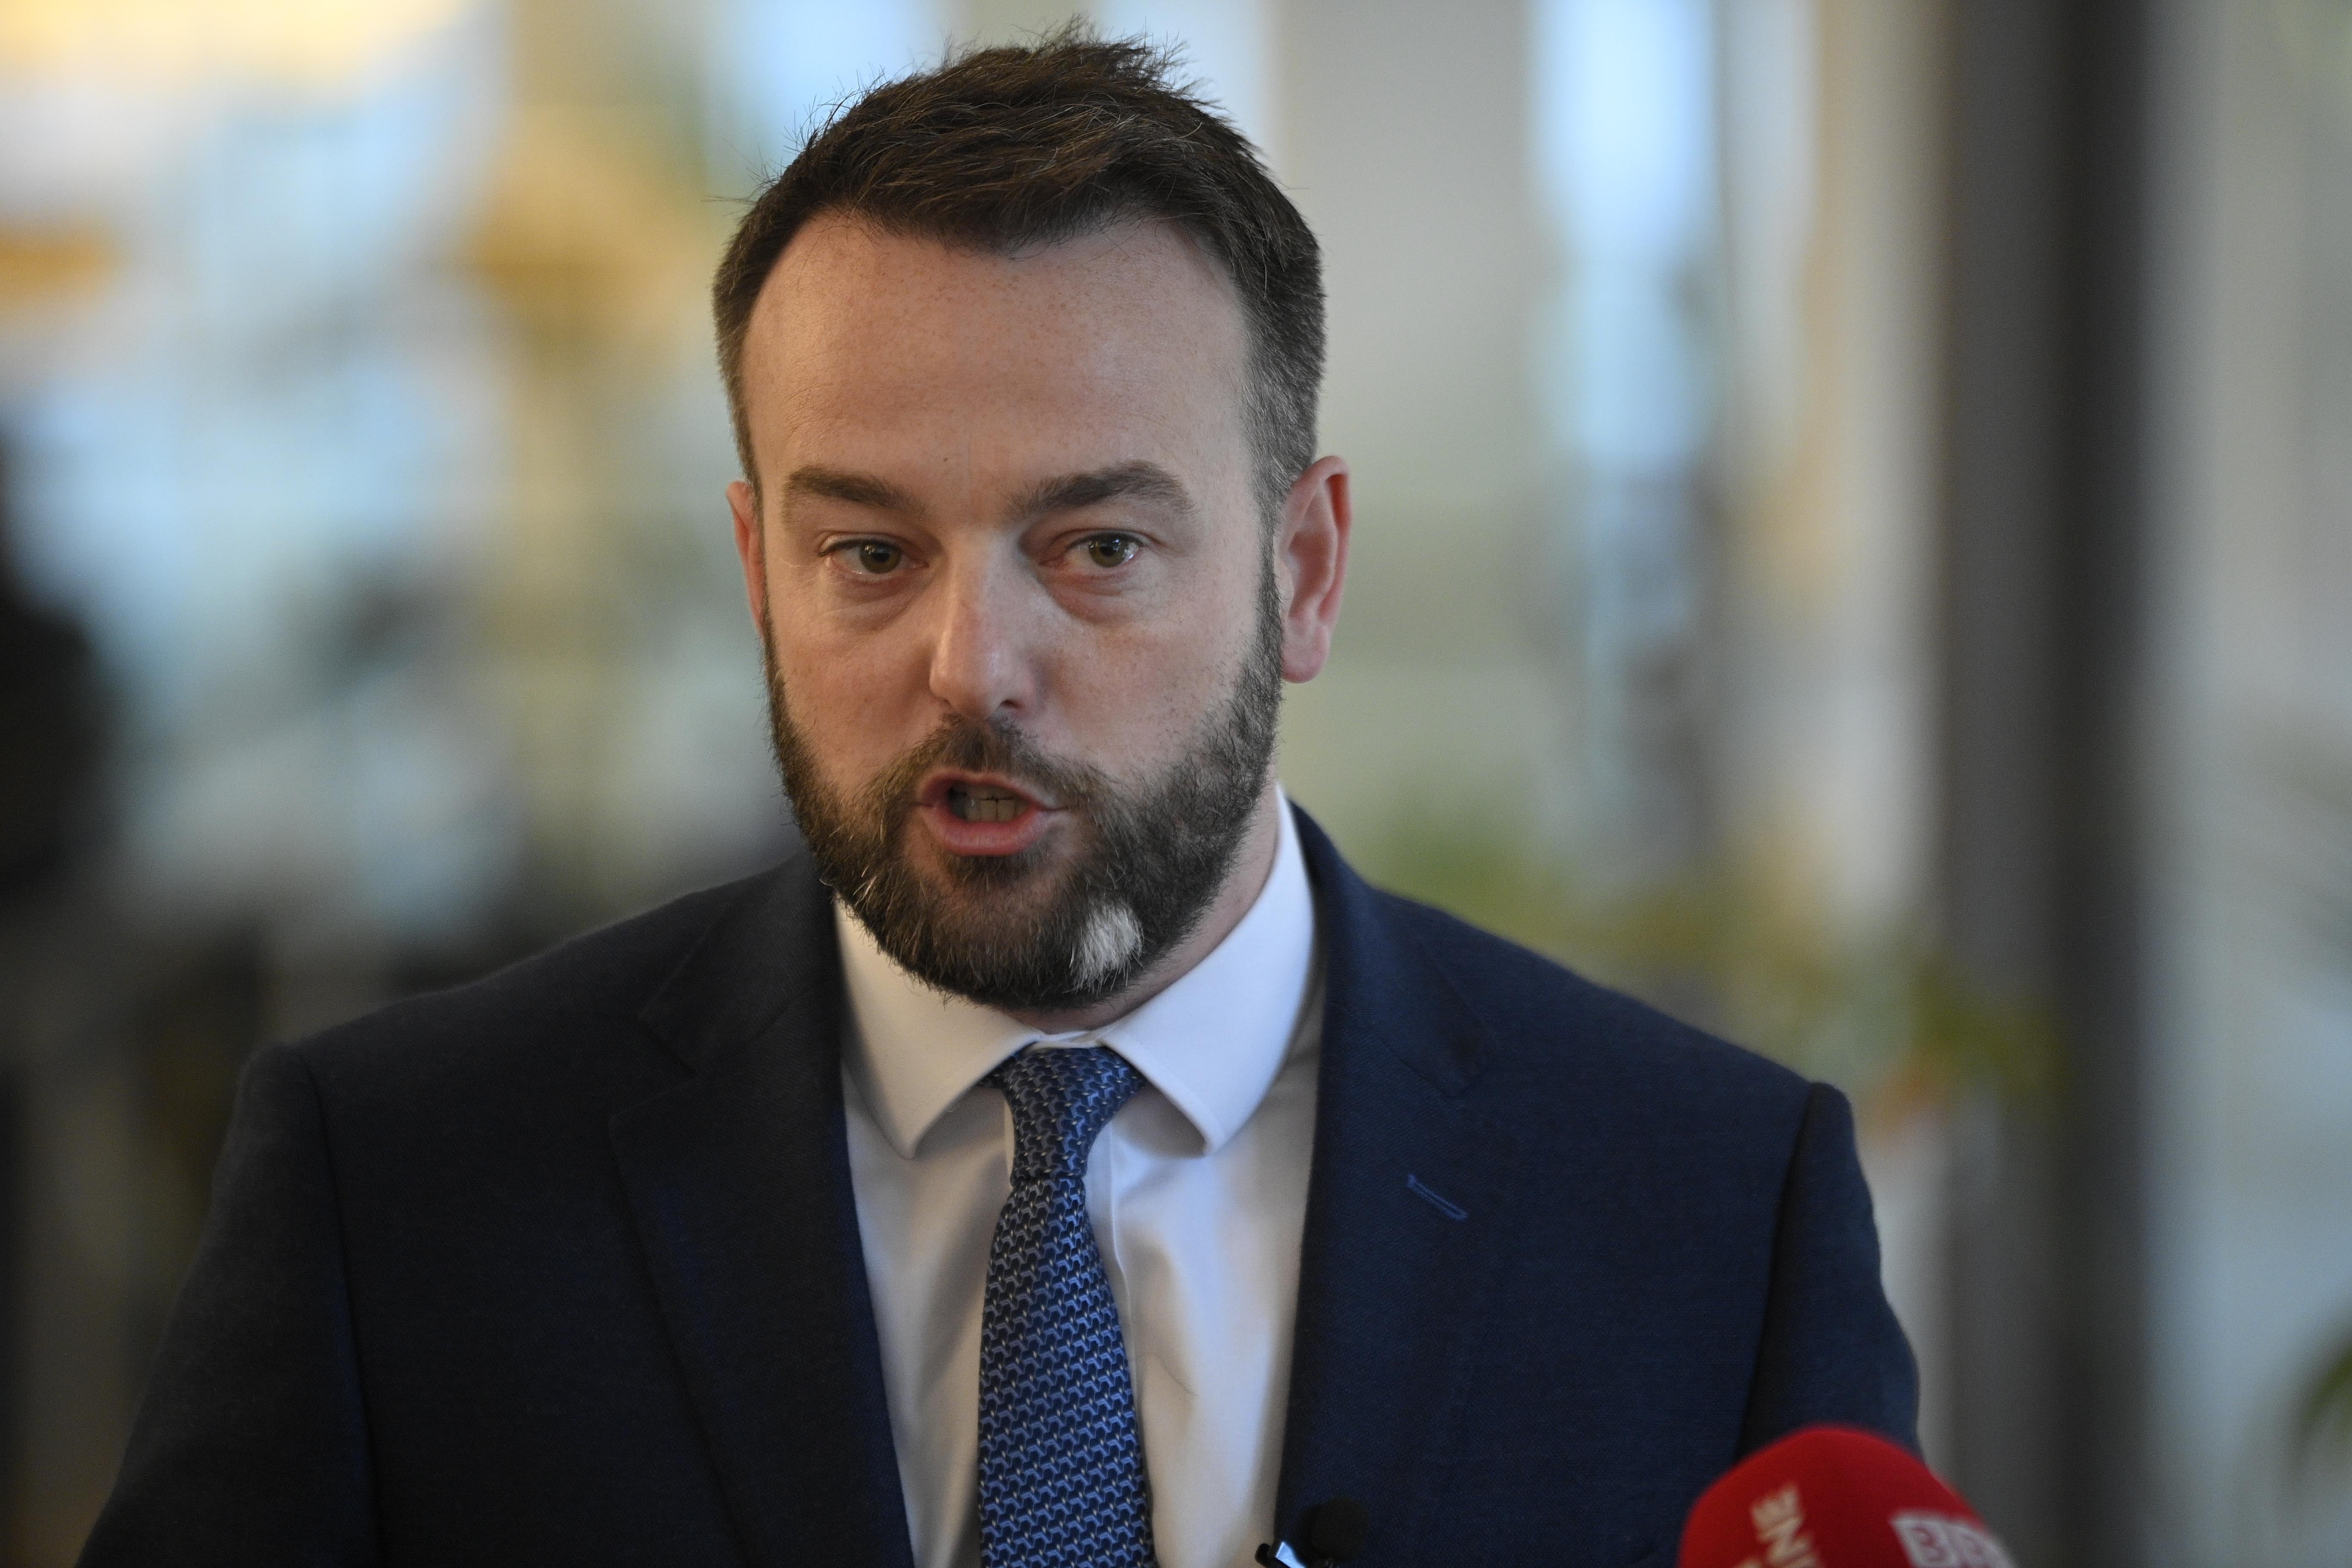 Colum Eastwood’s performance was rated as good or great by 36% of respondents (Mark Marlow/PA)